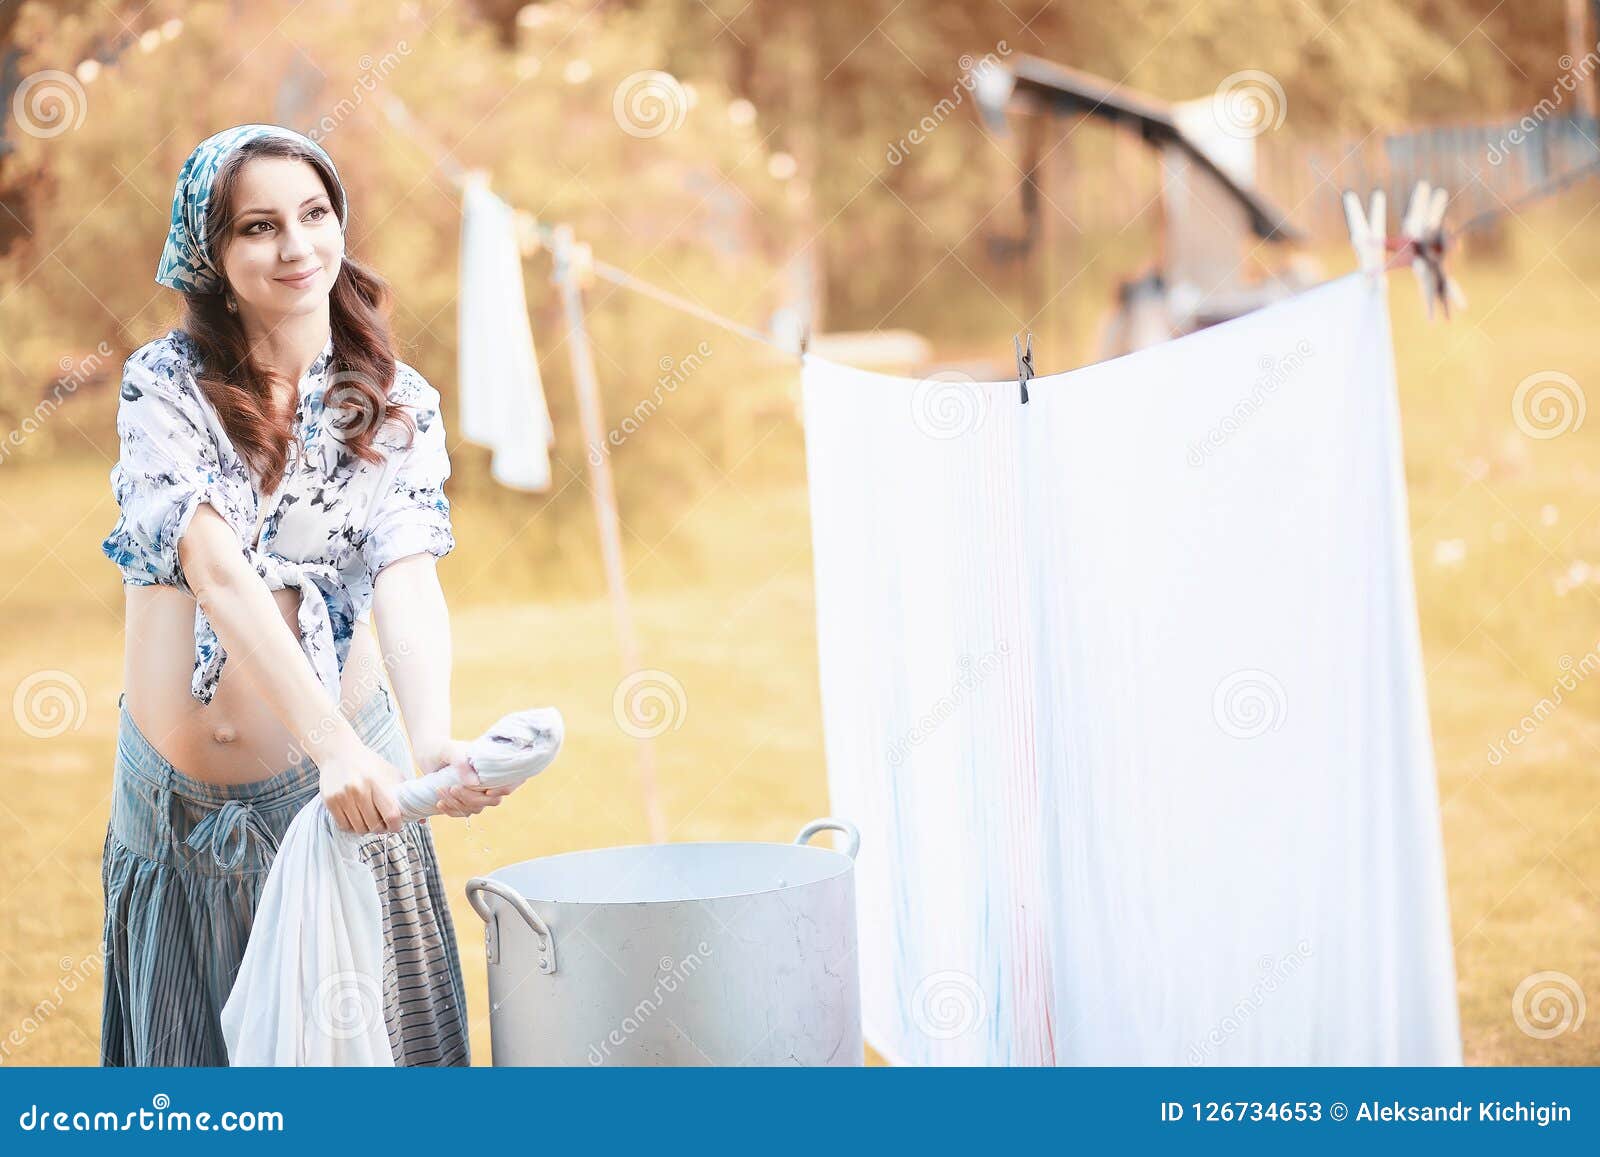 Pregnant Woman Hanging Sheets on the Rope for Drying Stock Image ...